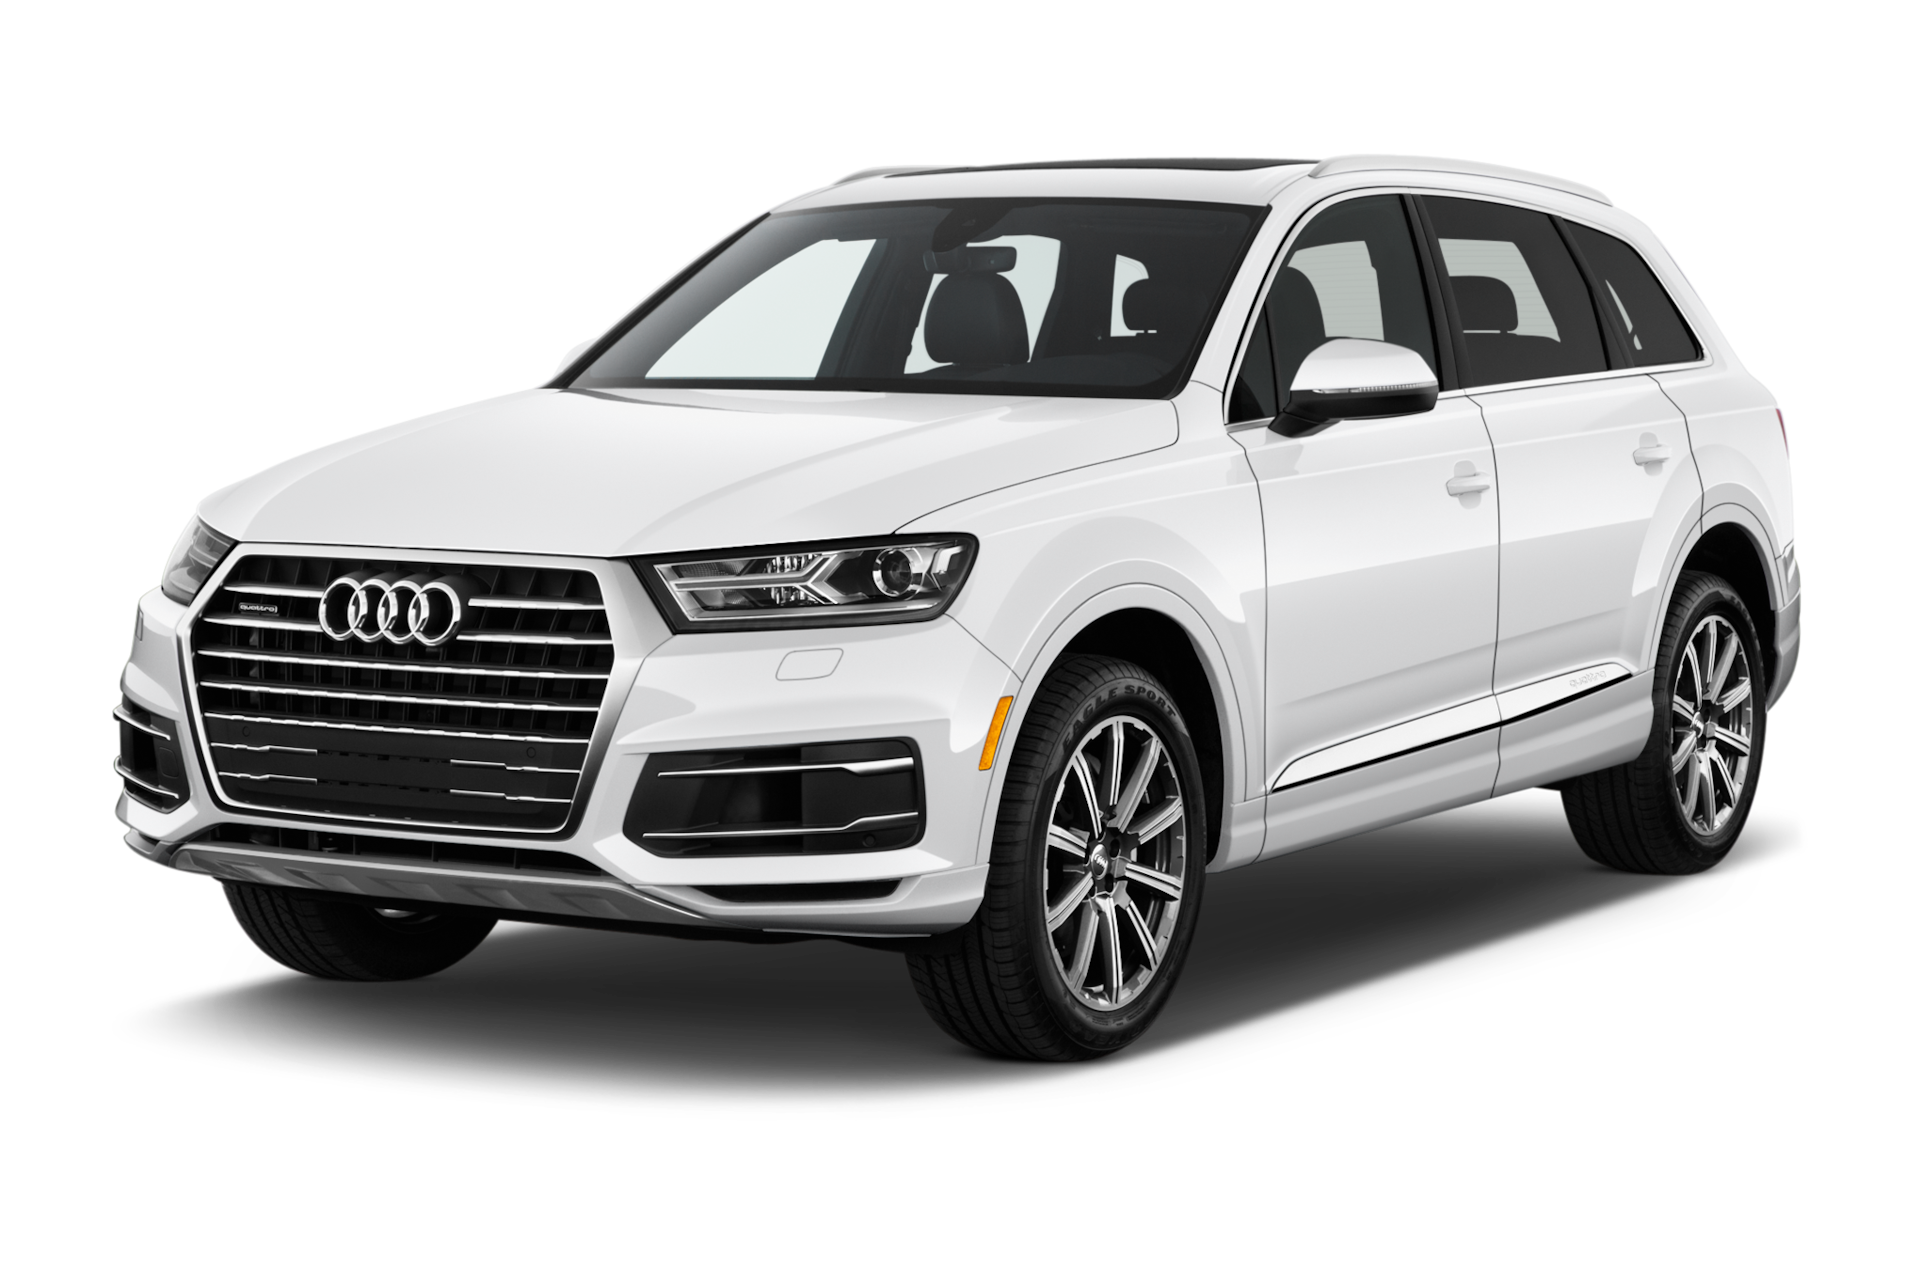 2019 Audi Q7 Prices, Reviews, and Photos - MotorTrend